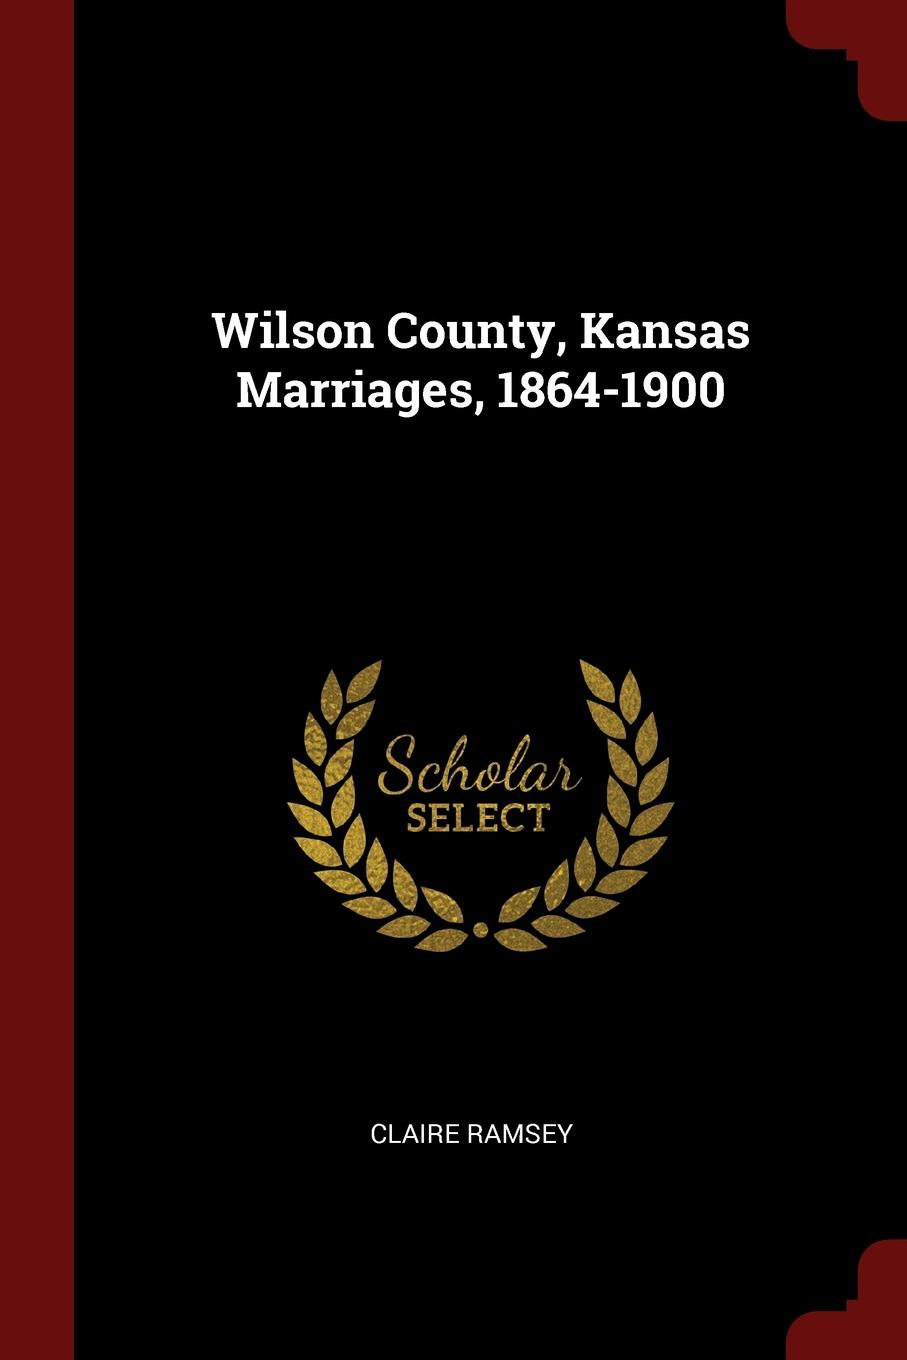 Wilson County, Kansas Marriages, 1864-1900